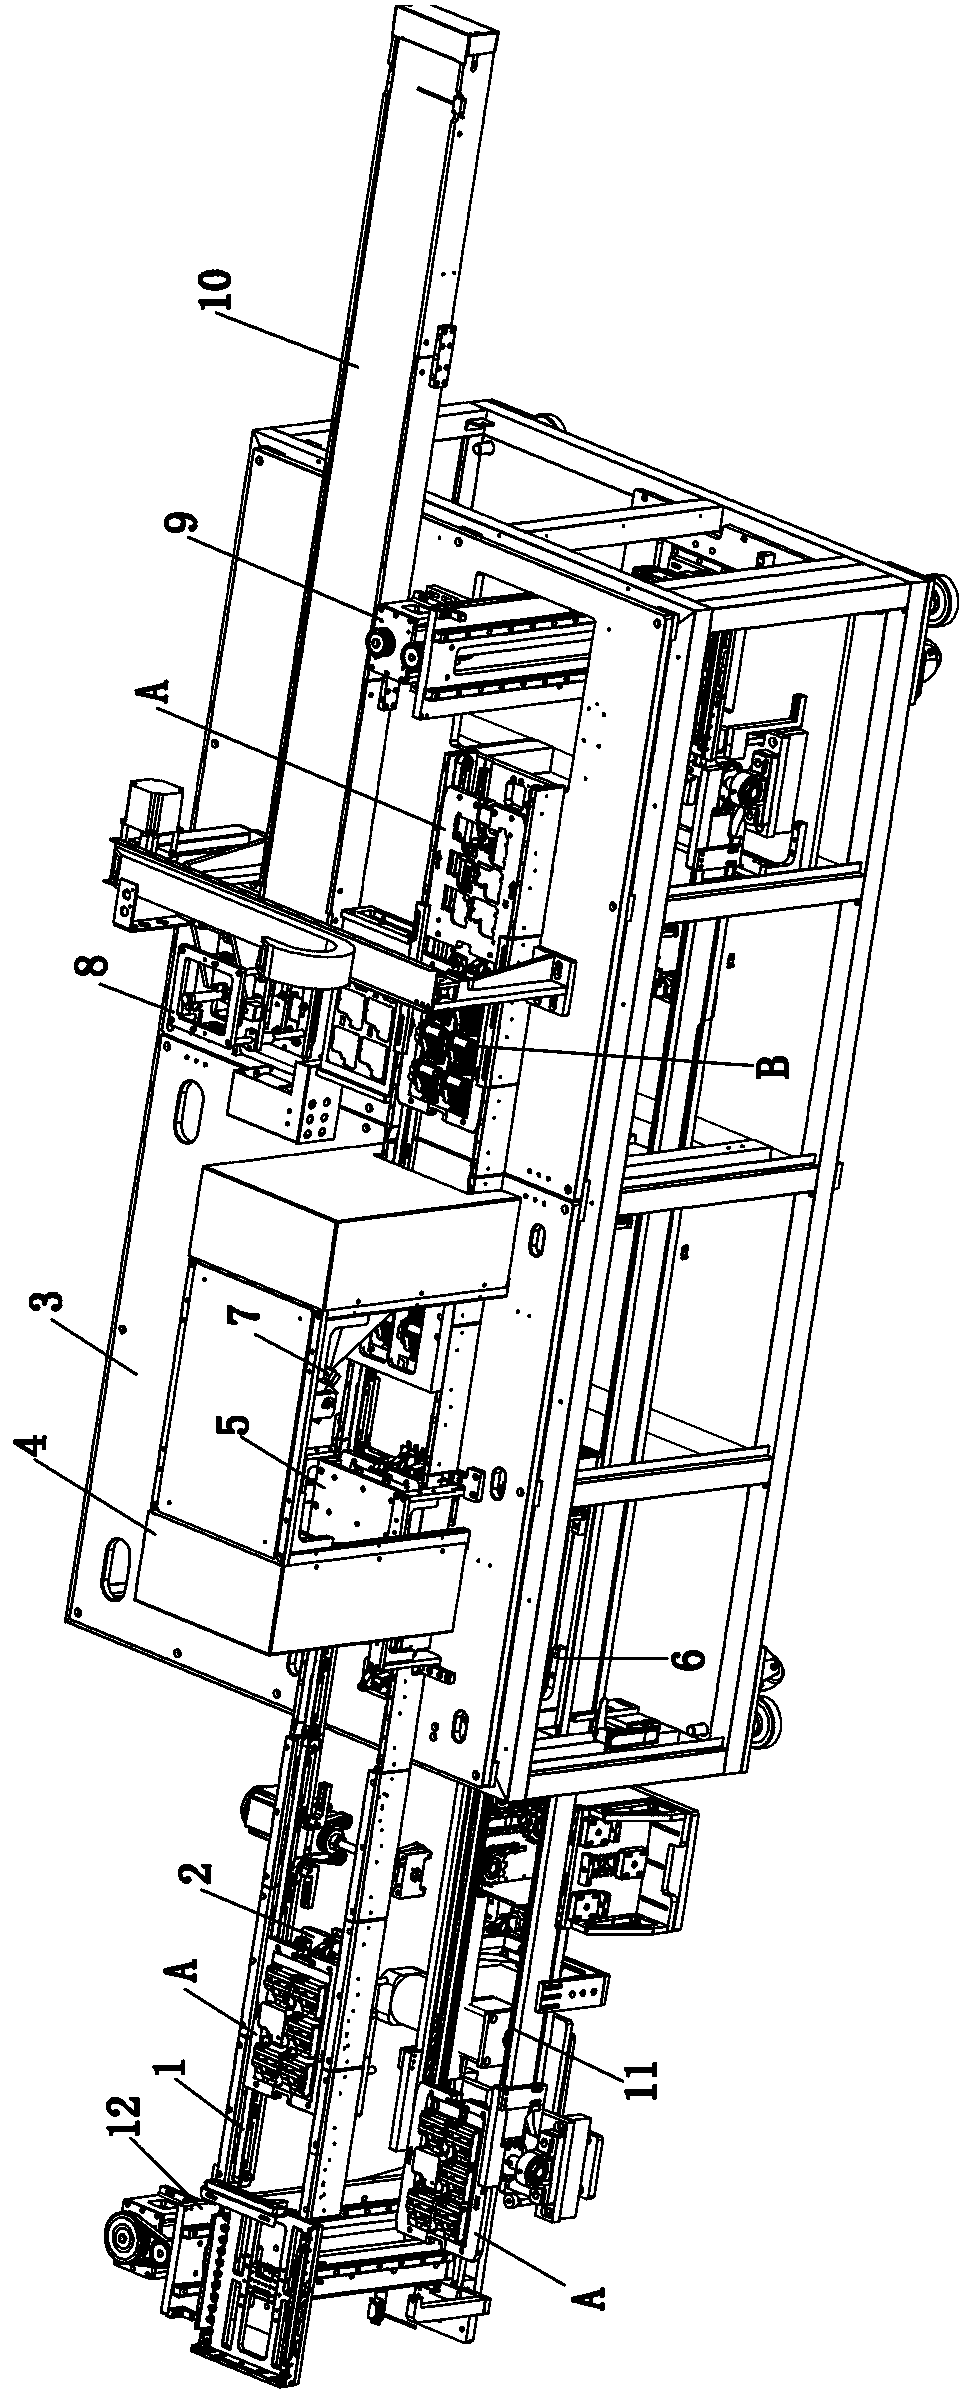 A component foot measuring machine and its measuring process